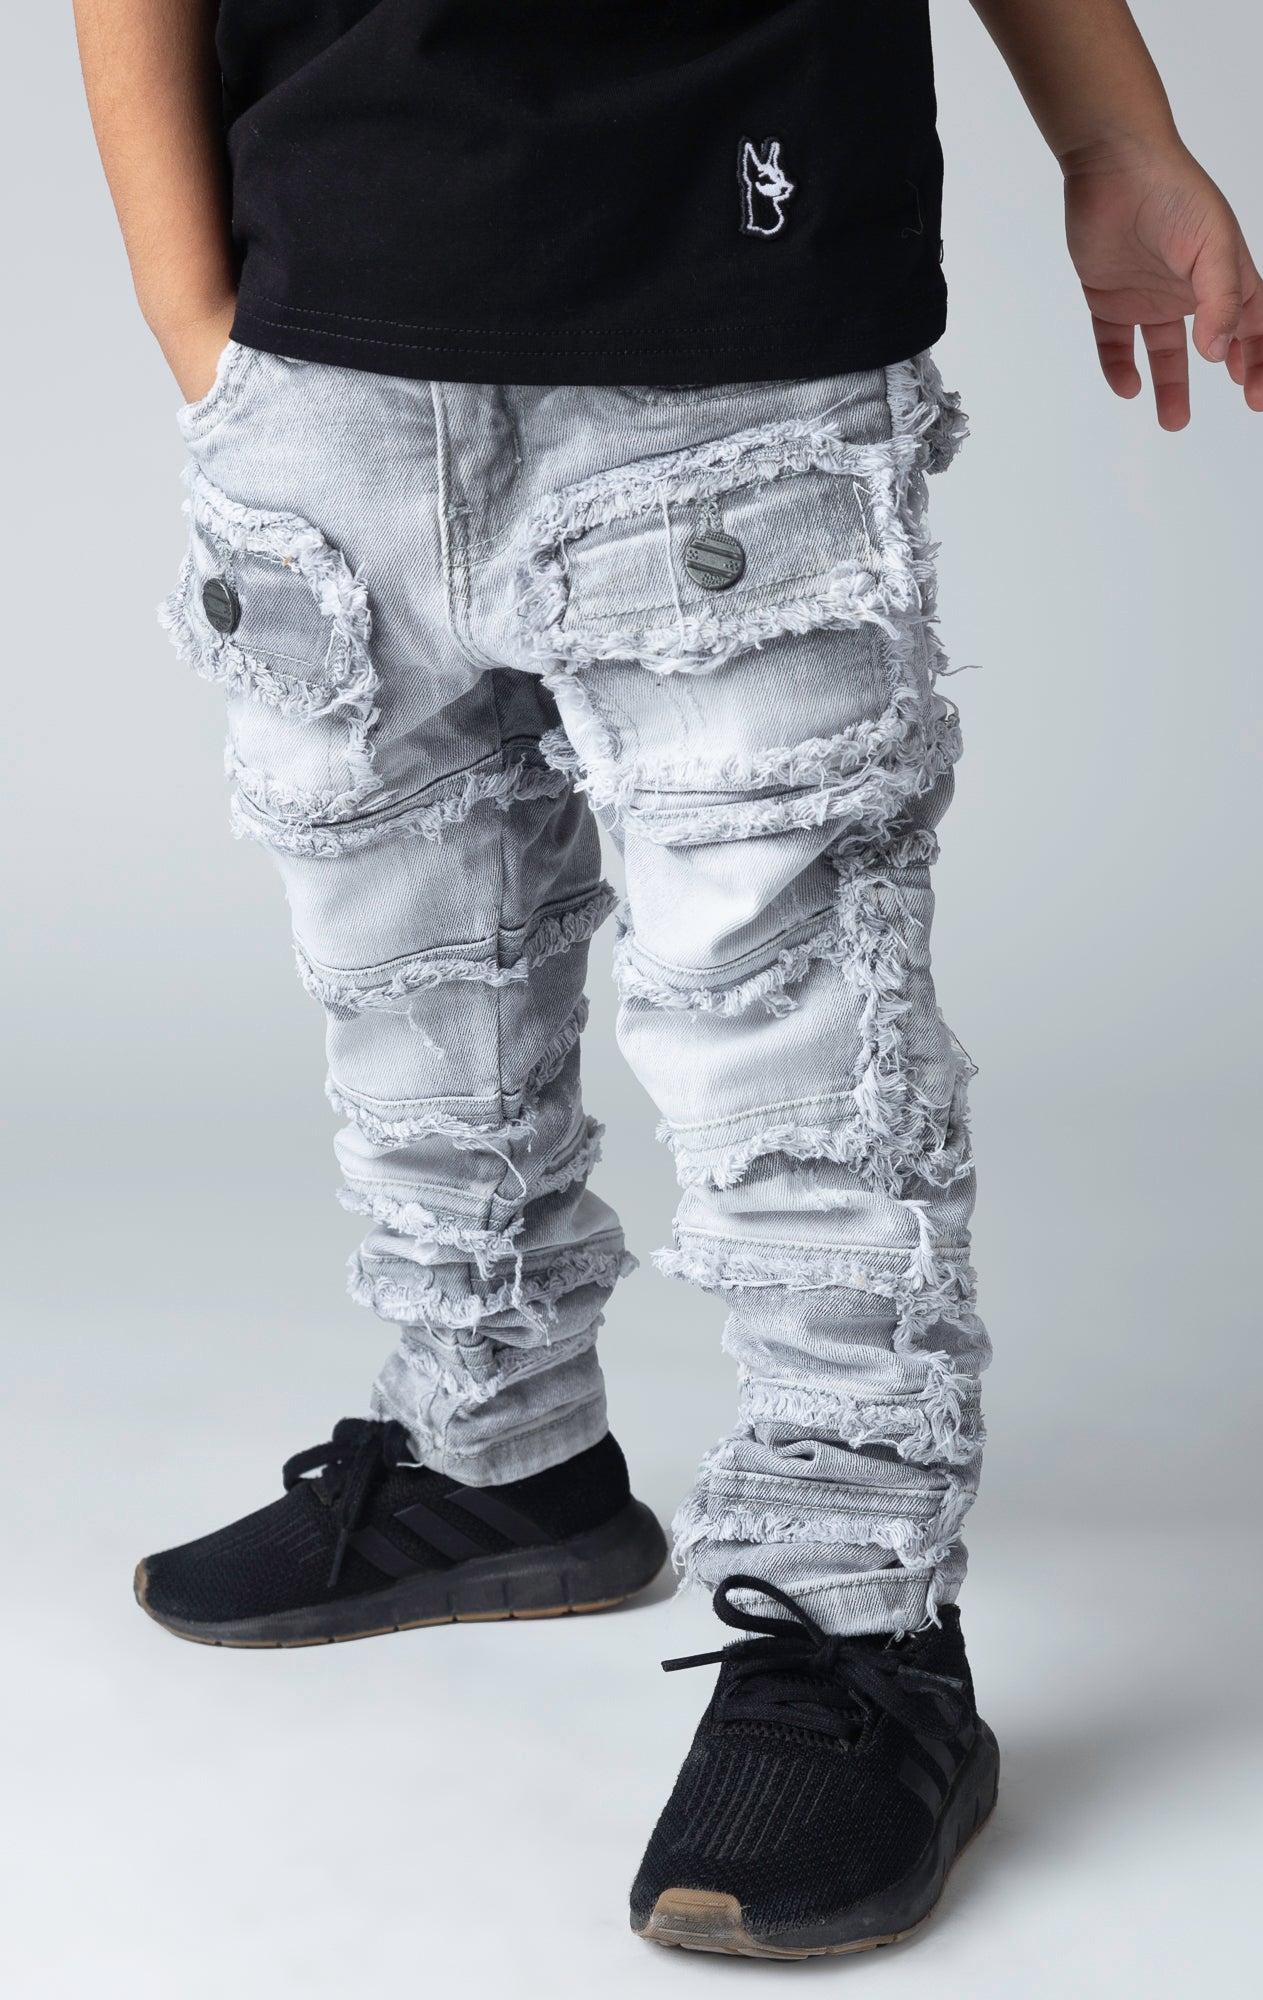 Stretch stacked denim pants for kids, distressed and paneled with a raw finishing 